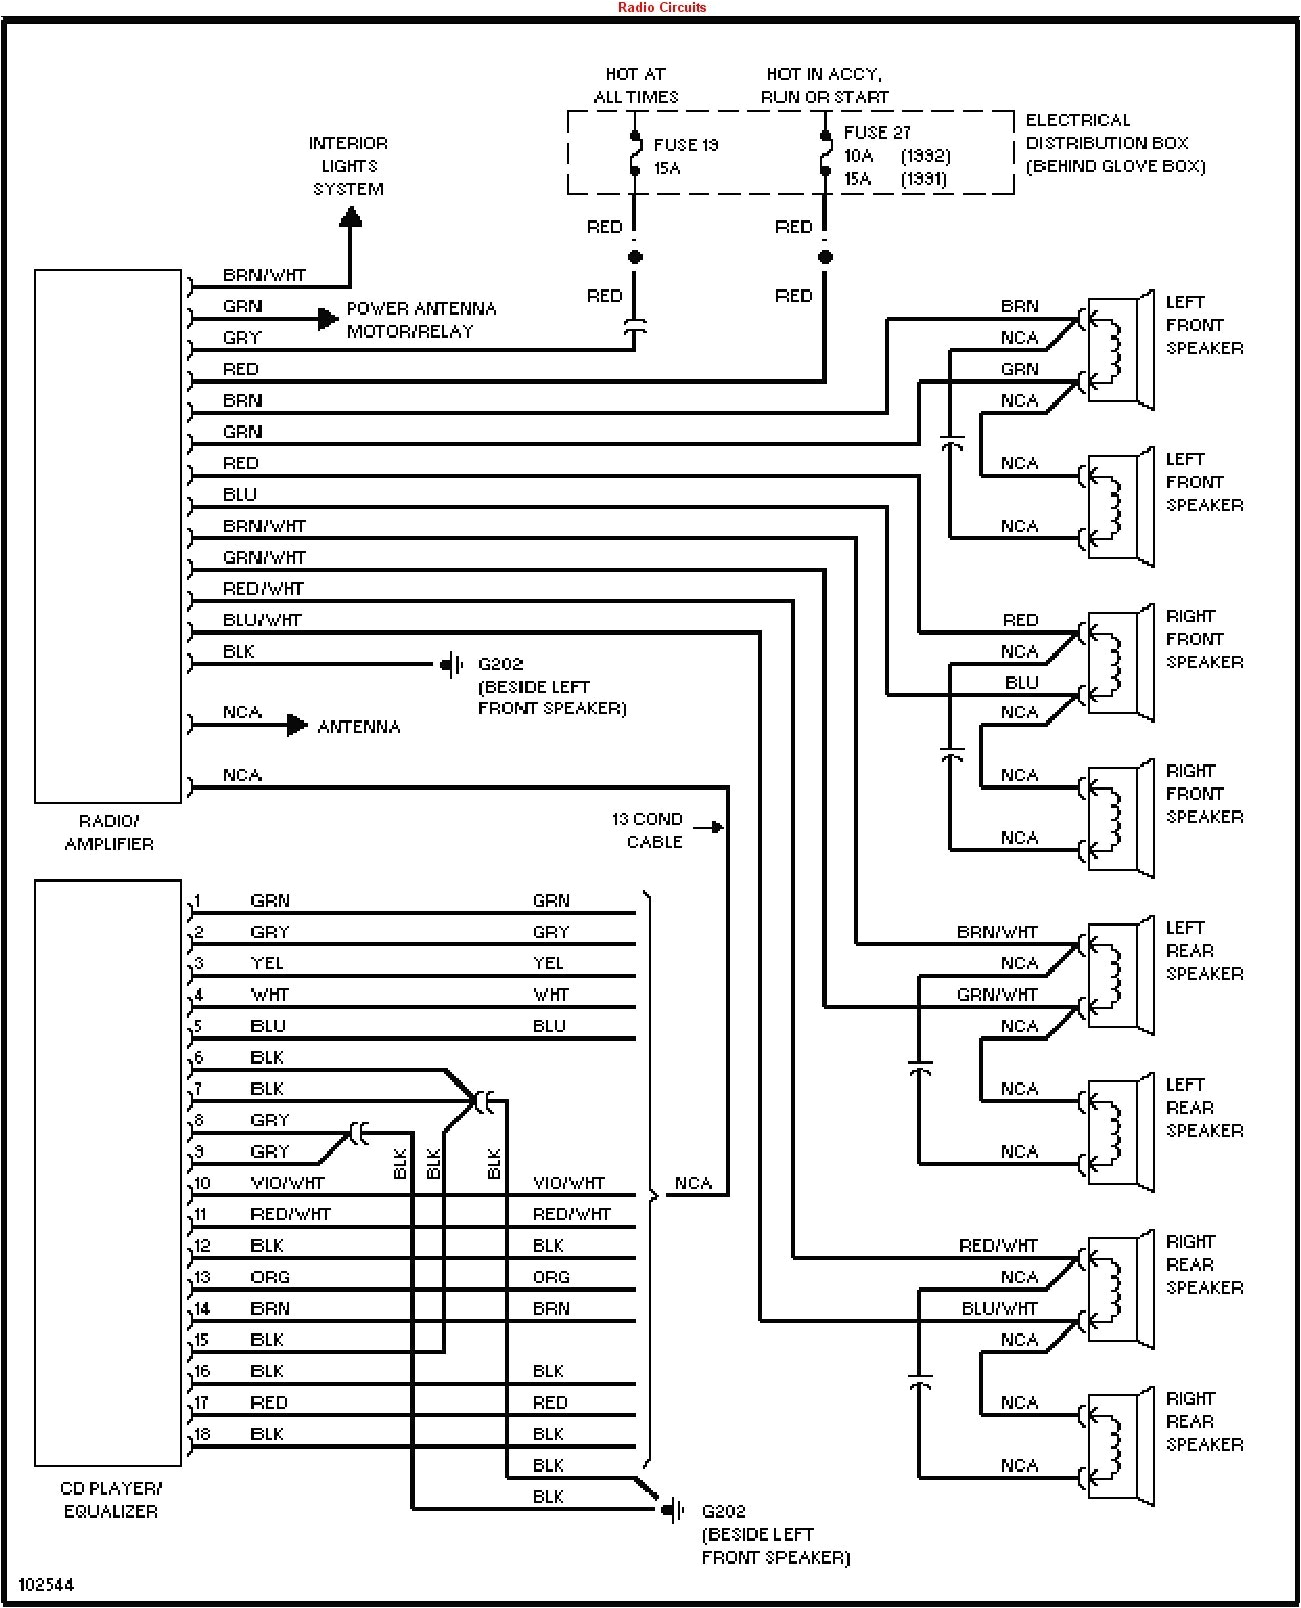 delphi radio wiring diagram thoritsolutions com entrancing delco electronics within or jpg